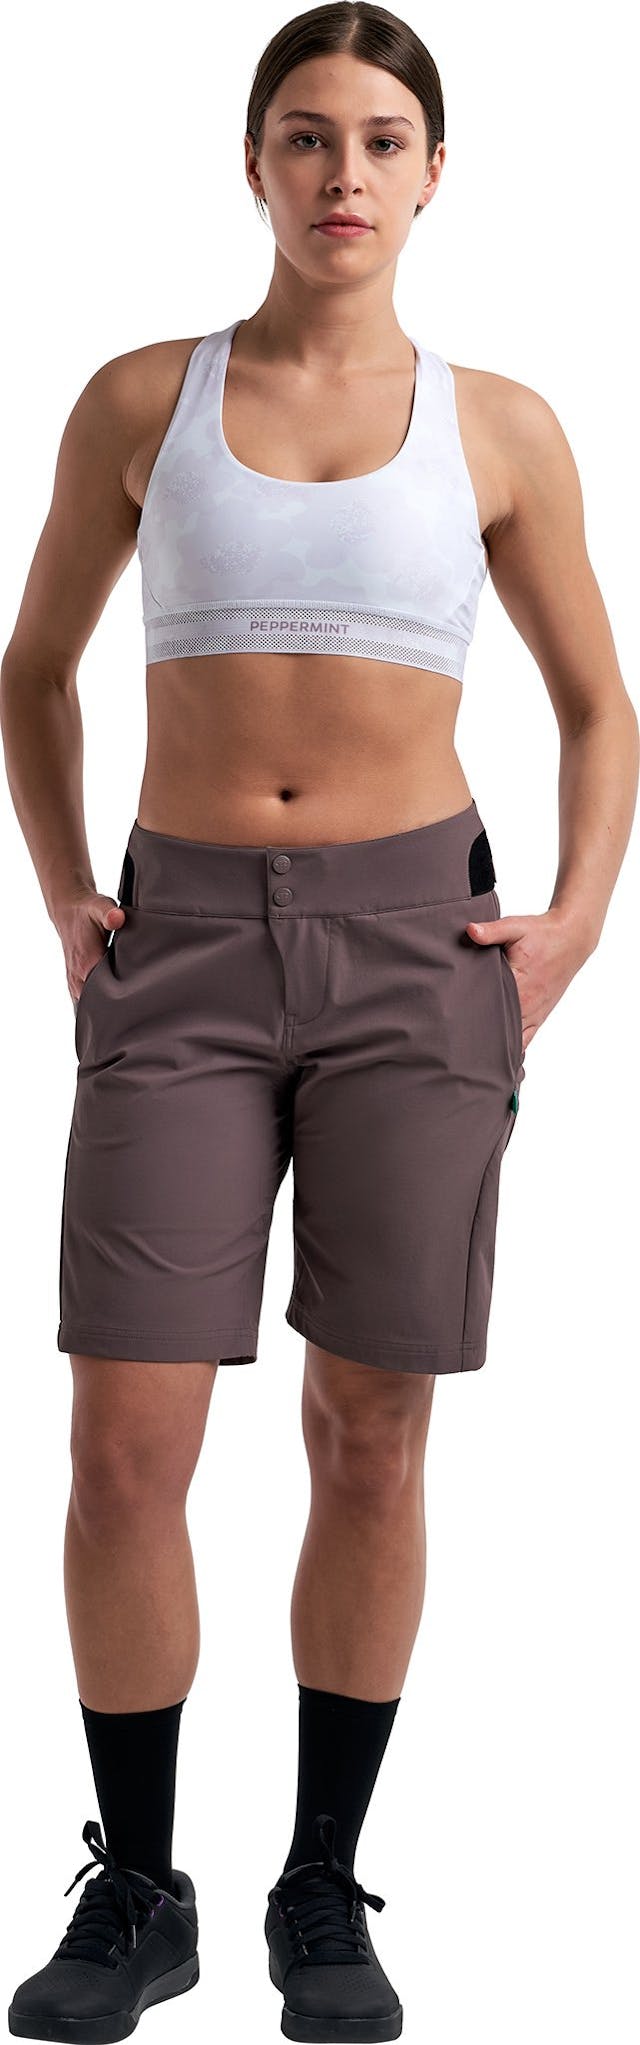 Product image for MTB Shorts - Women’s